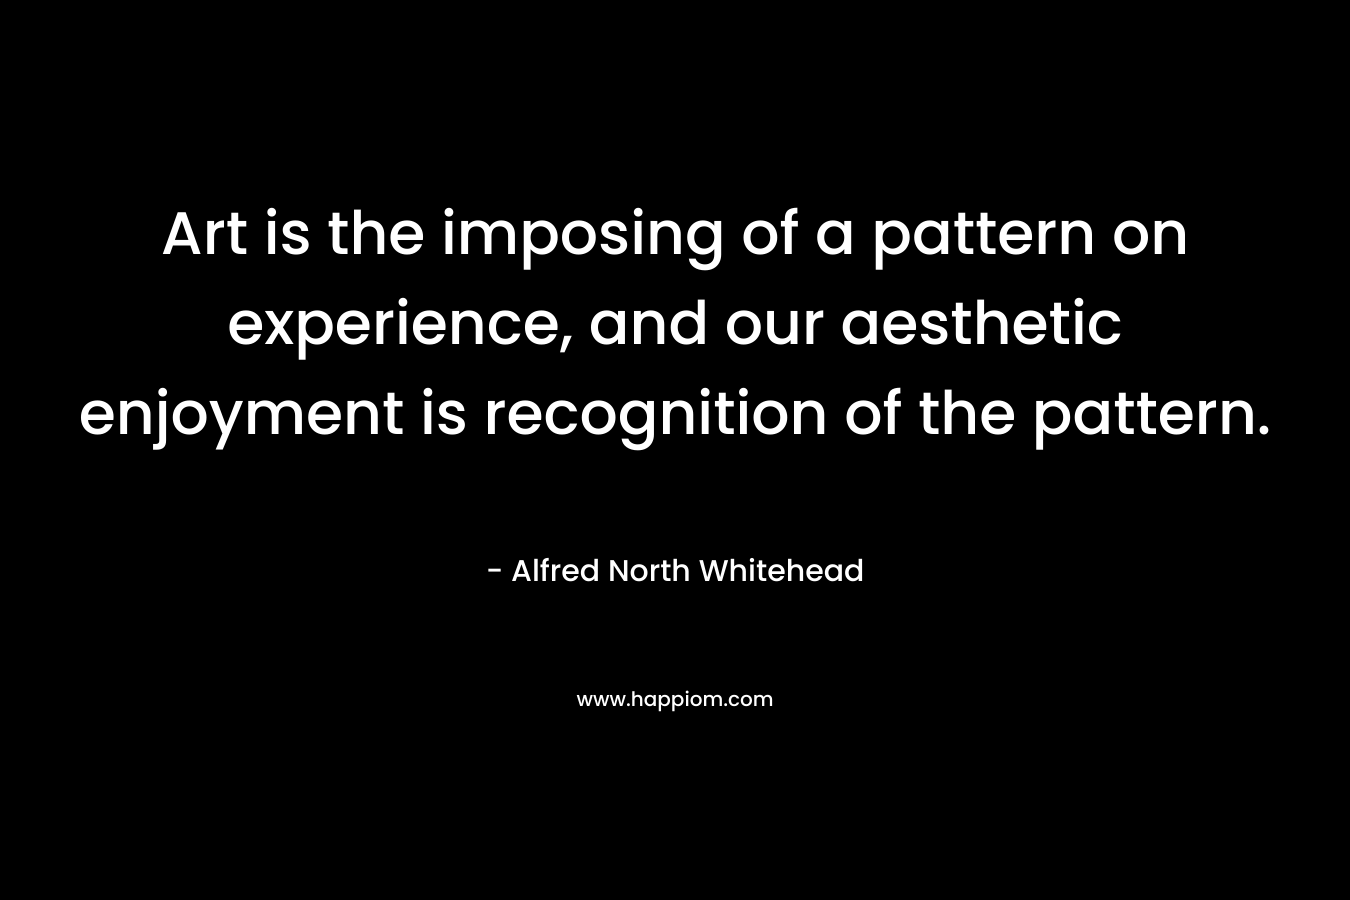 Art is the imposing of a pattern on experience, and our aesthetic enjoyment is recognition of the pattern. – Alfred North Whitehead